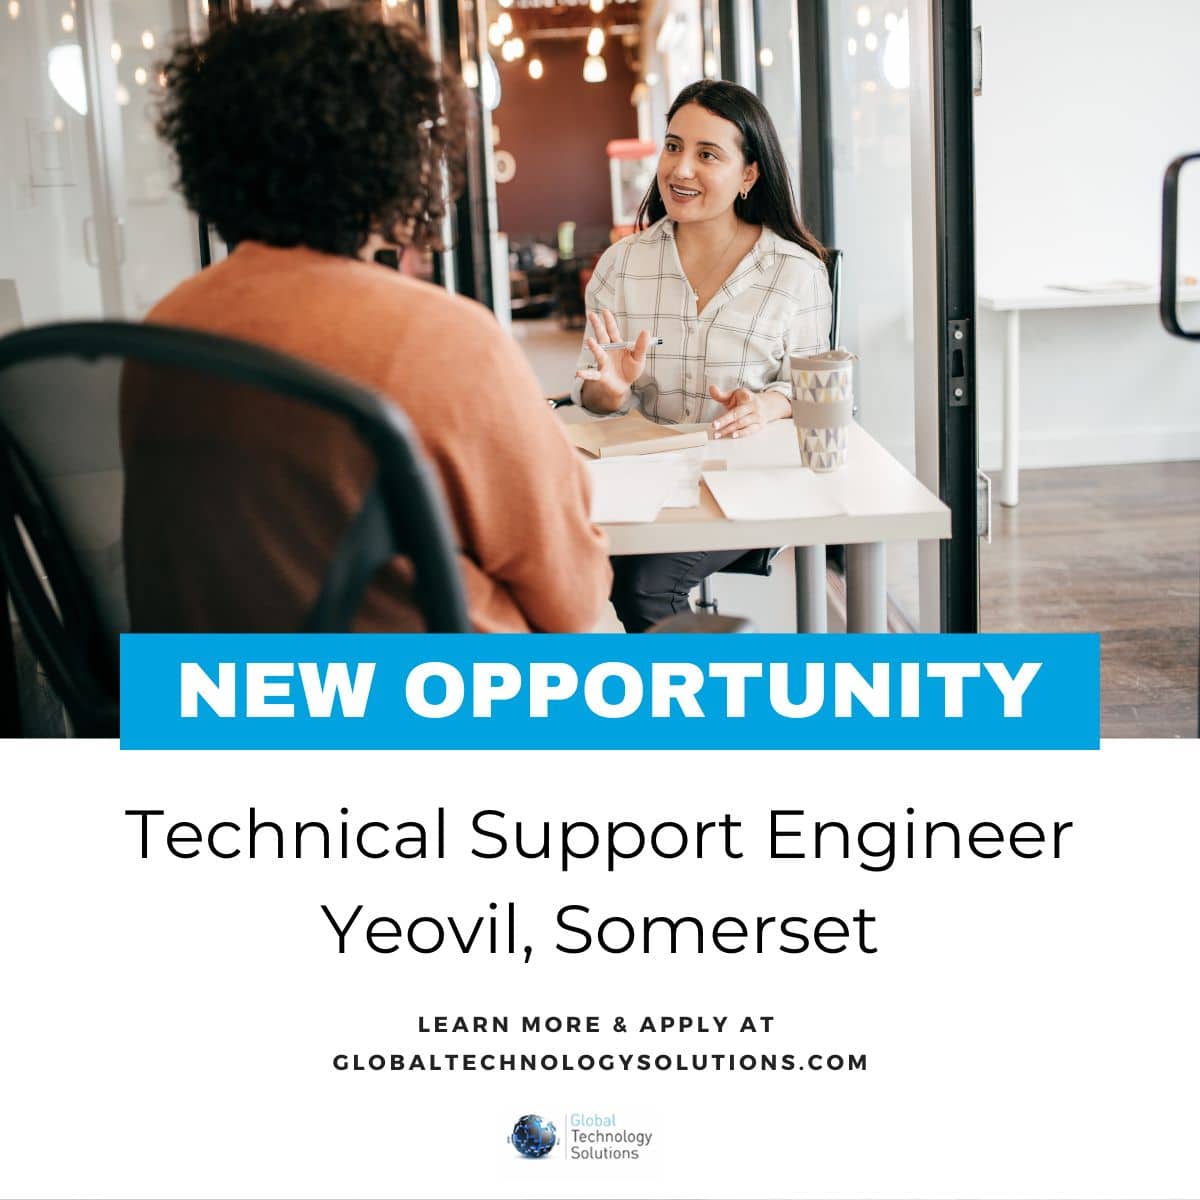 Technical Support Engineer jobs